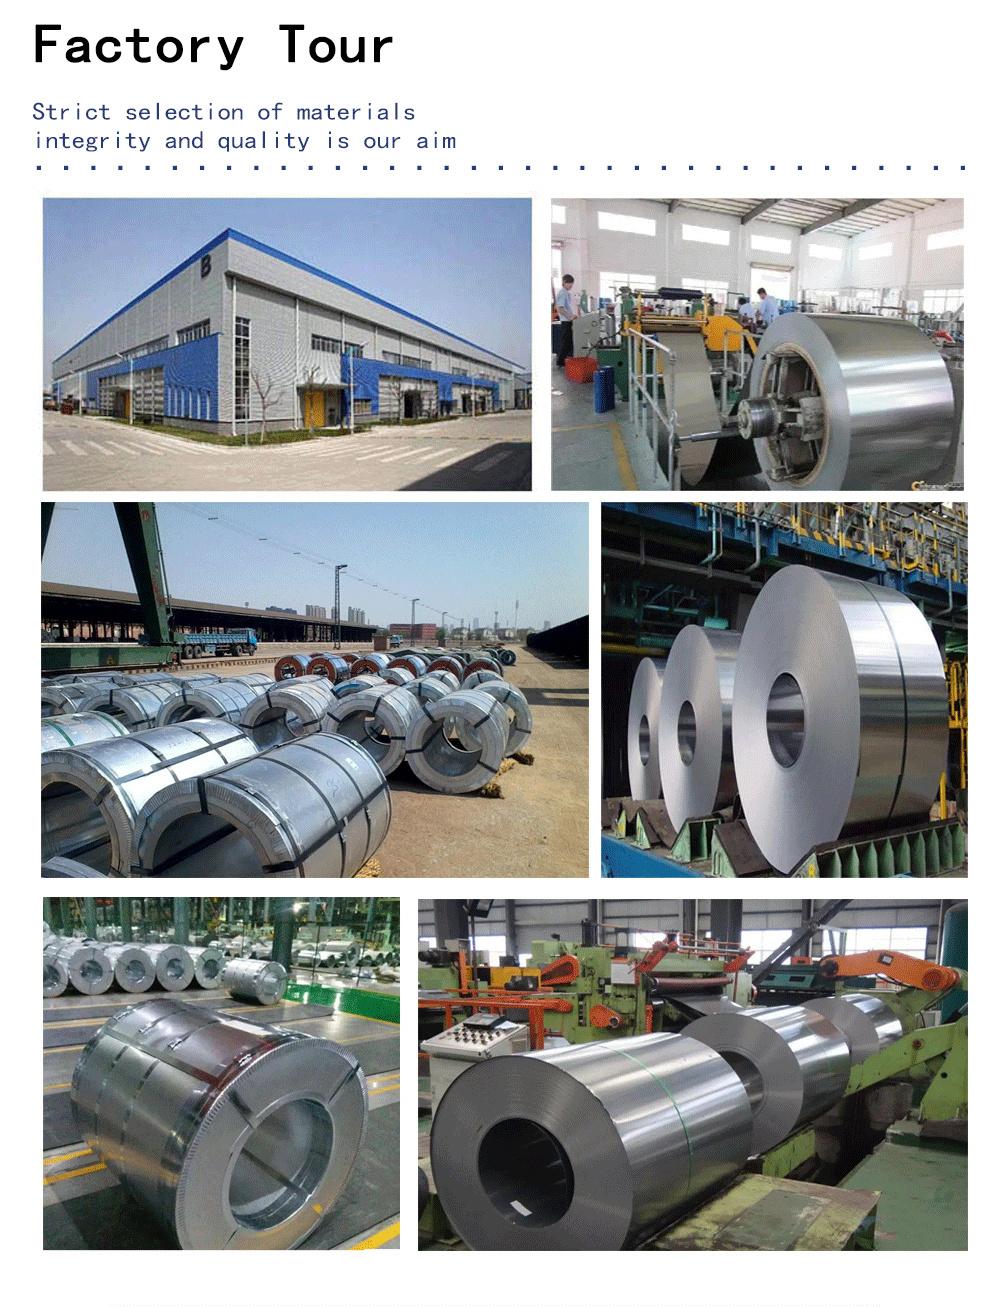 Dx51d Dx52D Z90 Z275 SGCC Zinc Coated Steel Coil Cold Rolled Electro Galvanized Steel Coil Roll Price Gi Coil 24 Gauge Galvanized Steel Coil